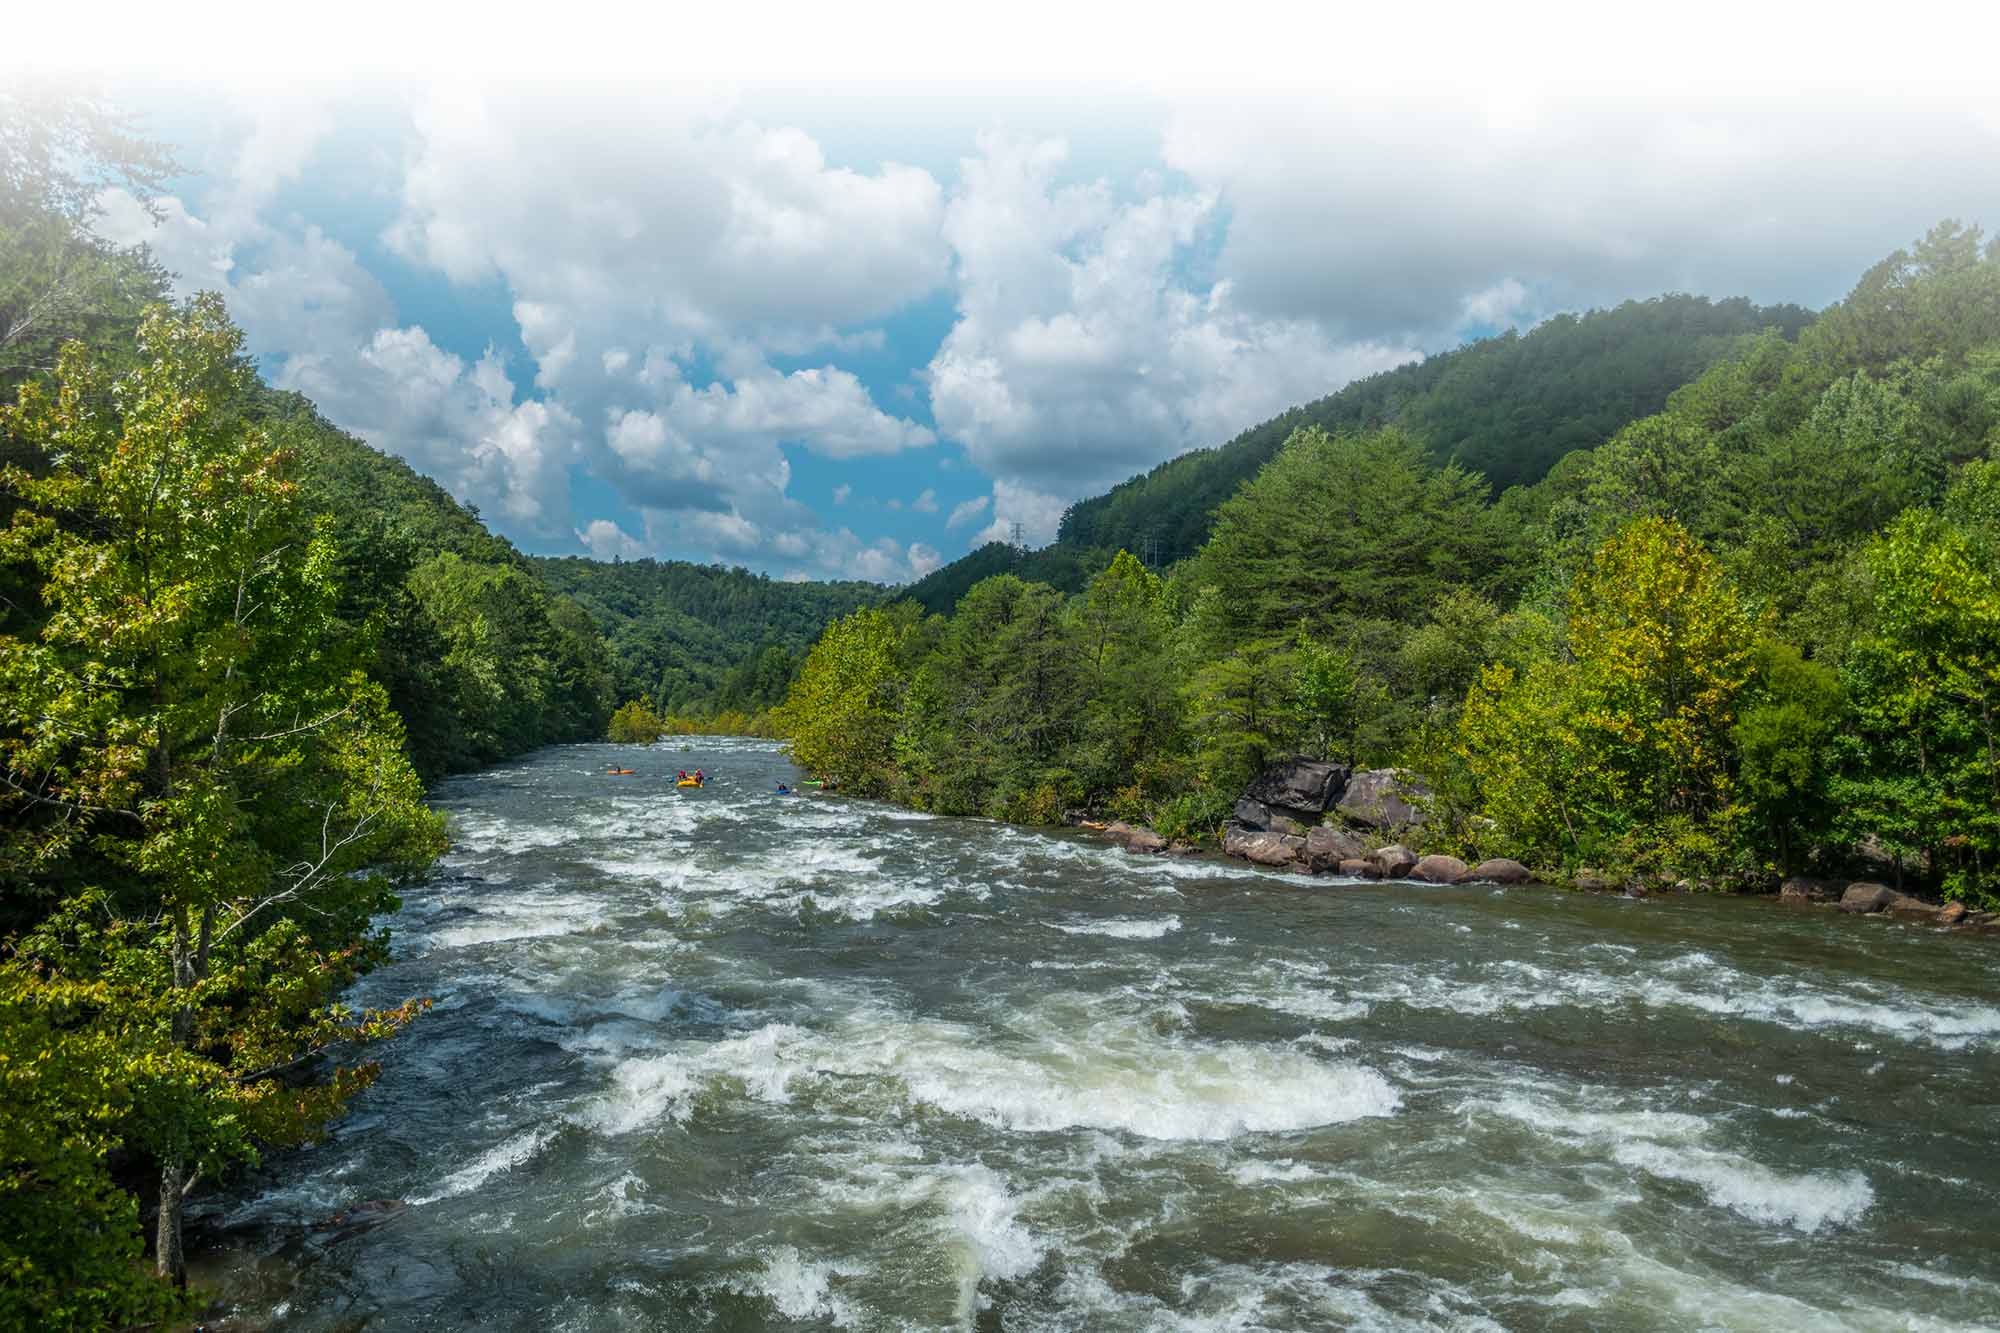 Rafting Outfitters in the Ocoee River Corridor